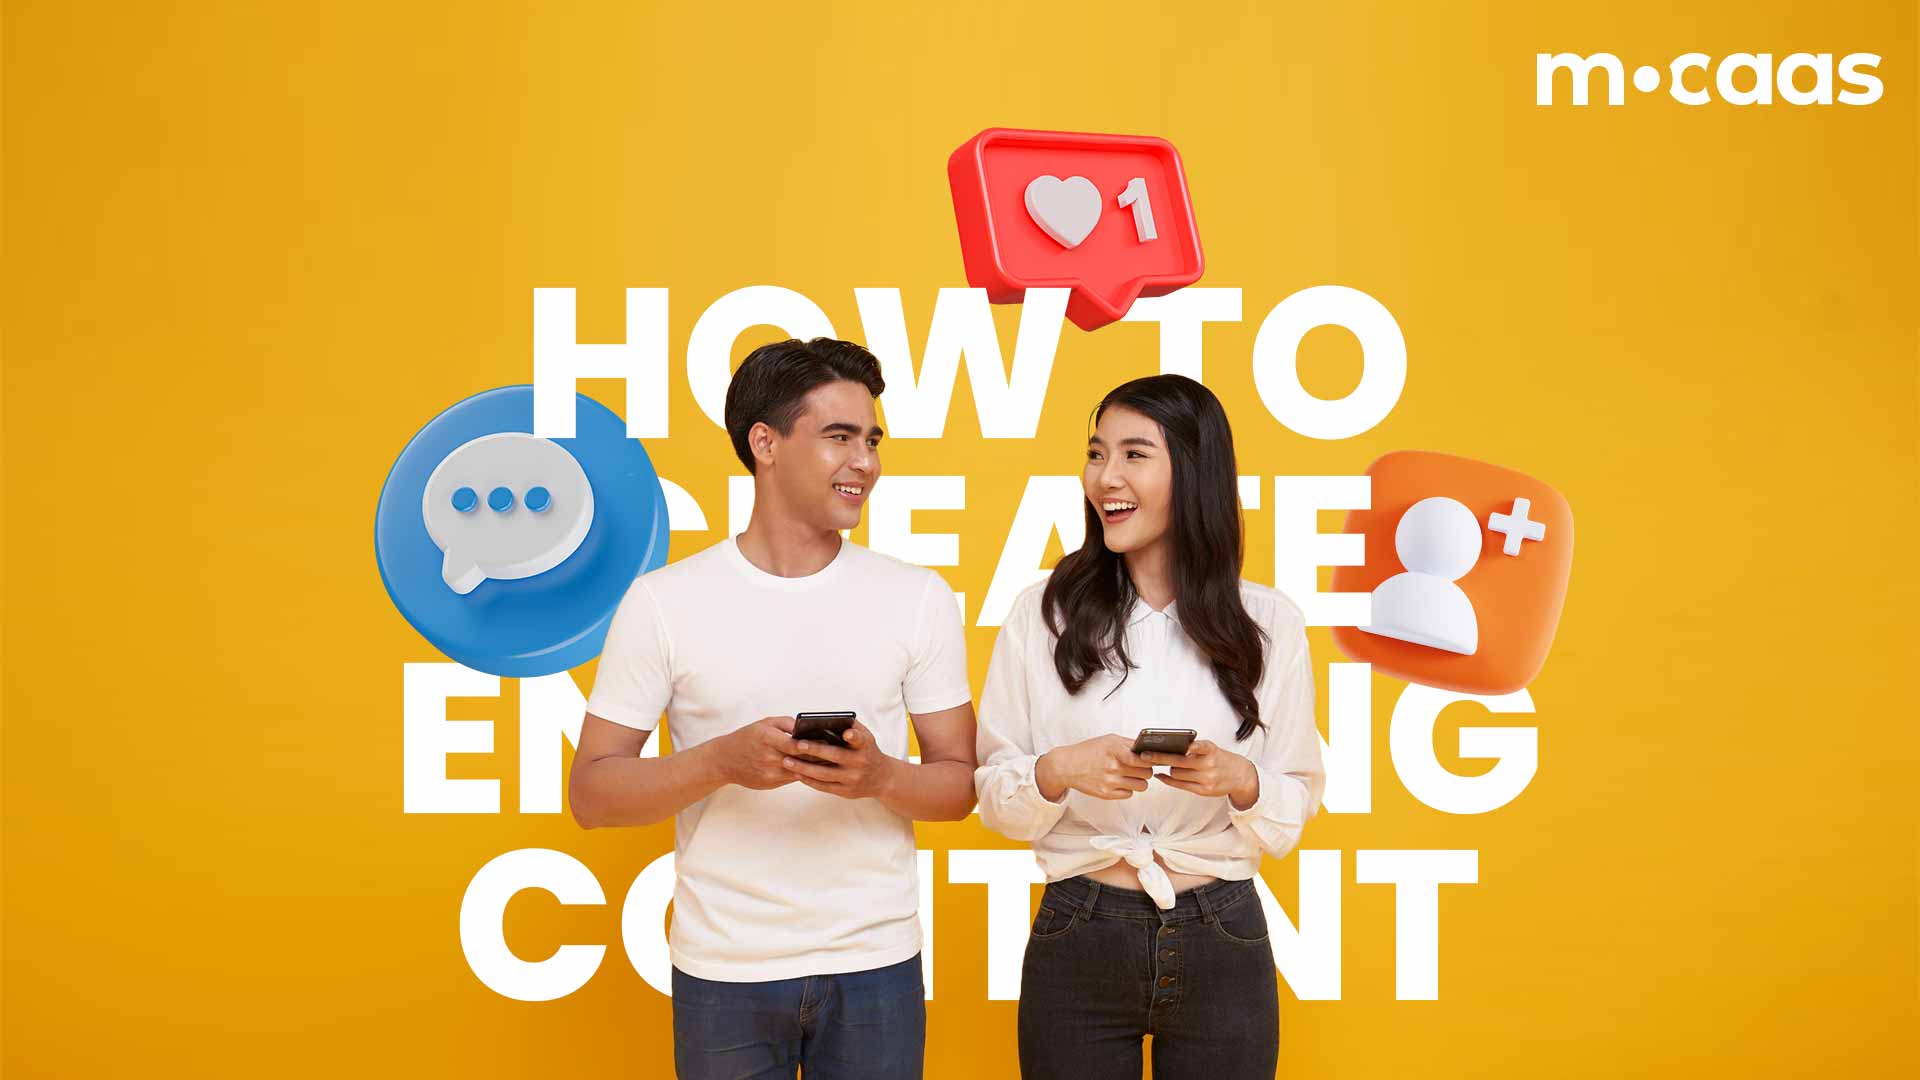 two content creators are chatting about how to create engaging content on social media